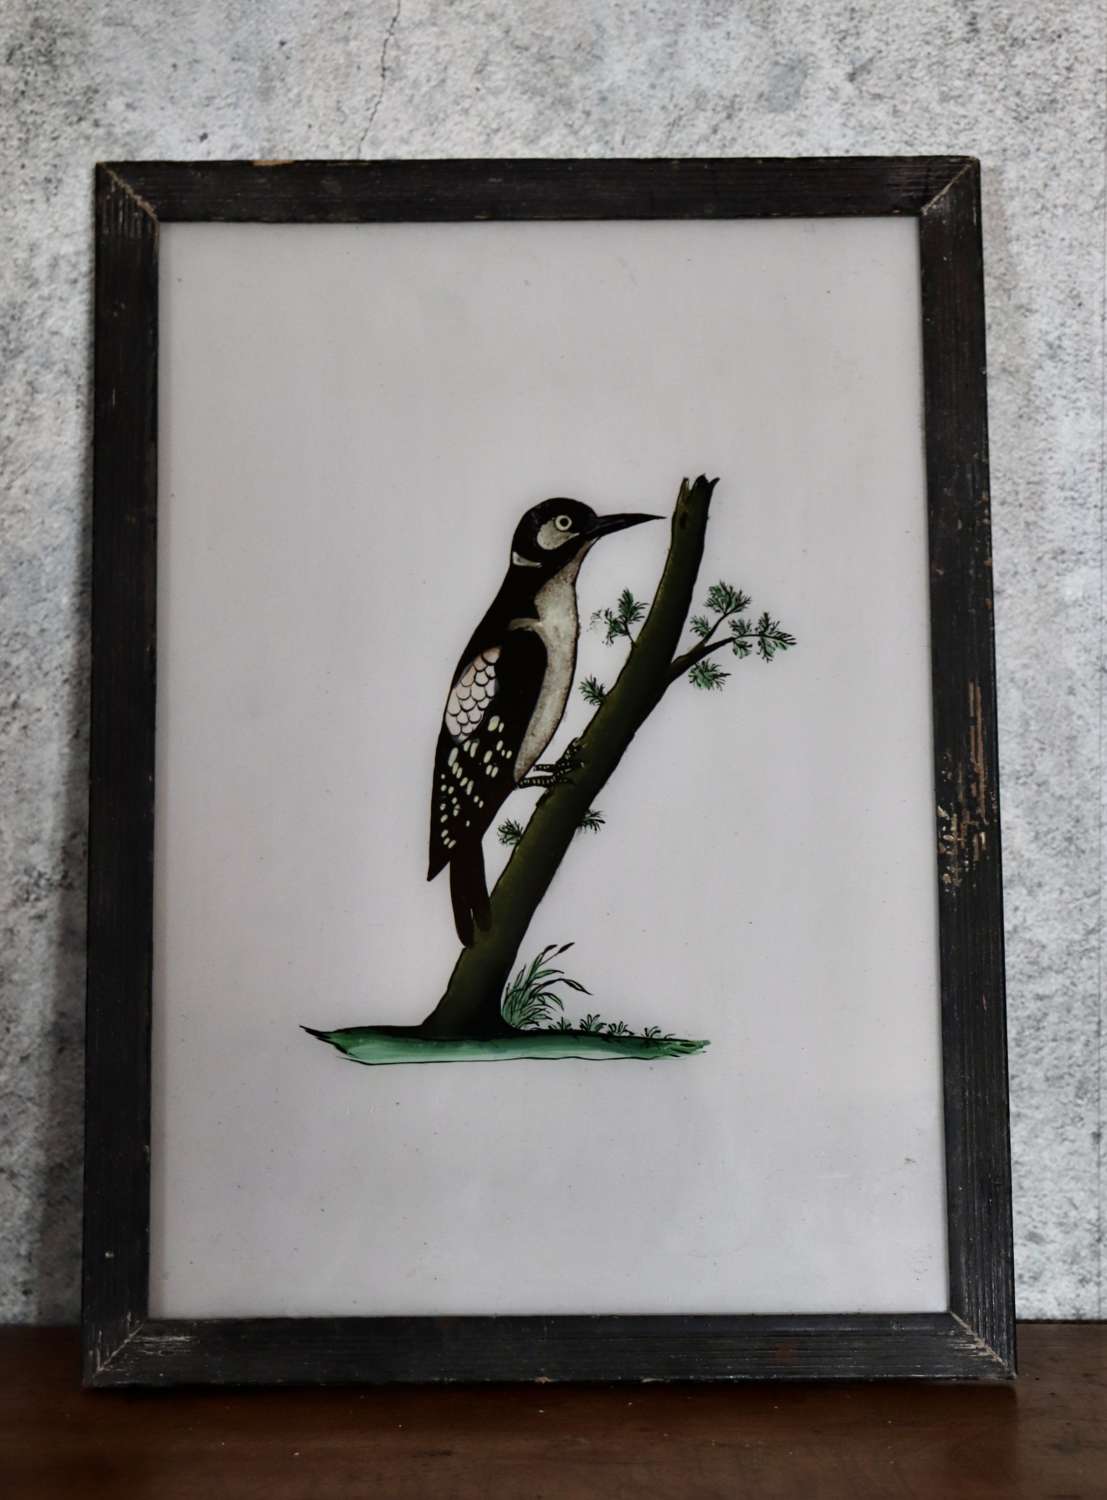 Indian reverse glass painting of woodpecker